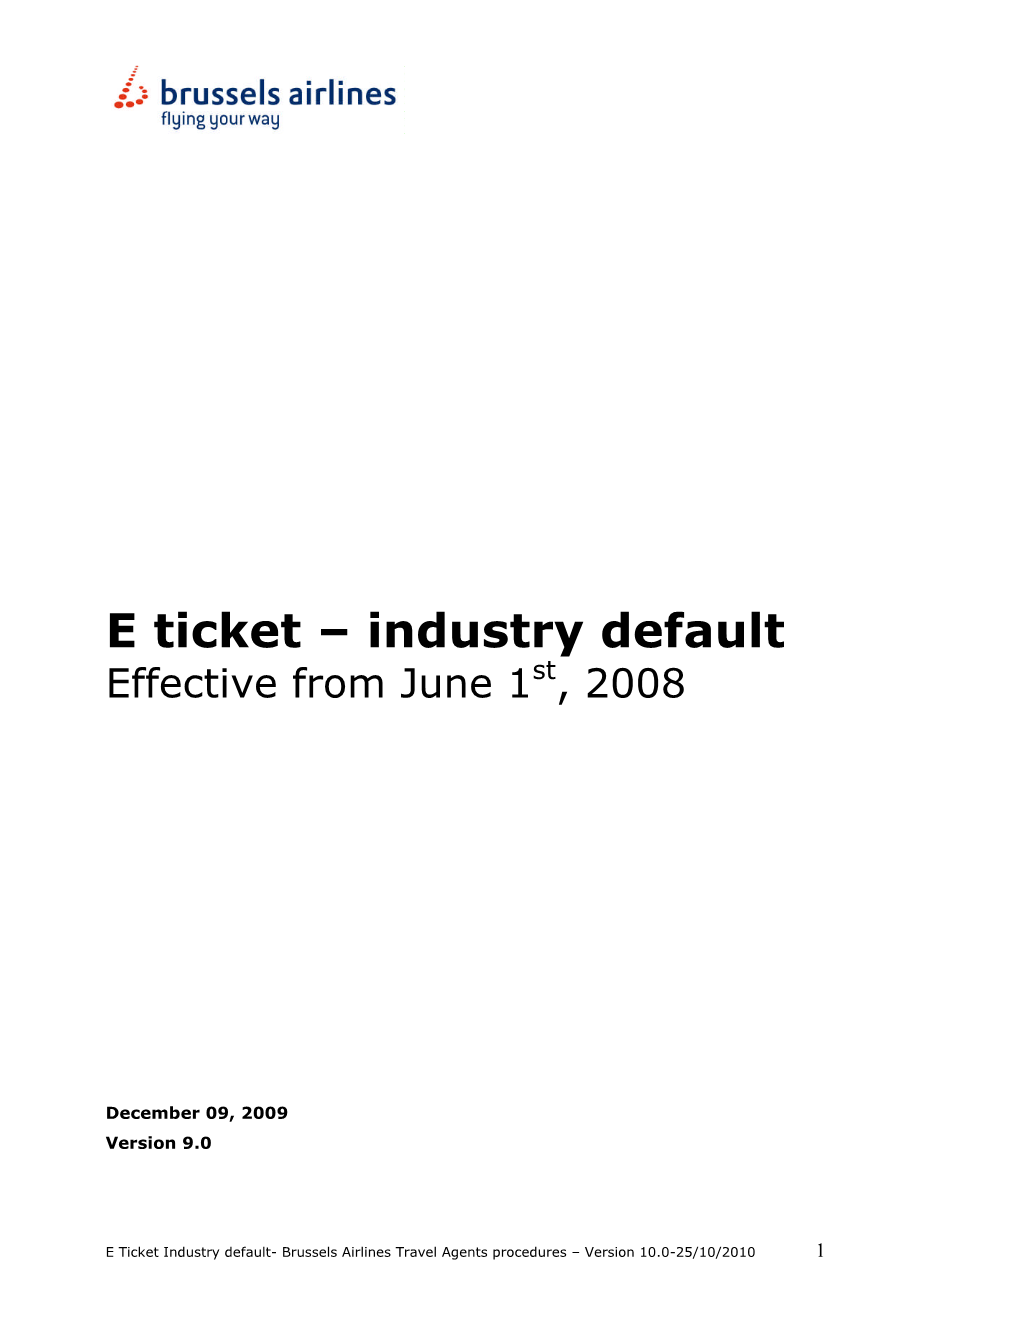 E Ticket – Industry Default Effective from June 1St, 2008